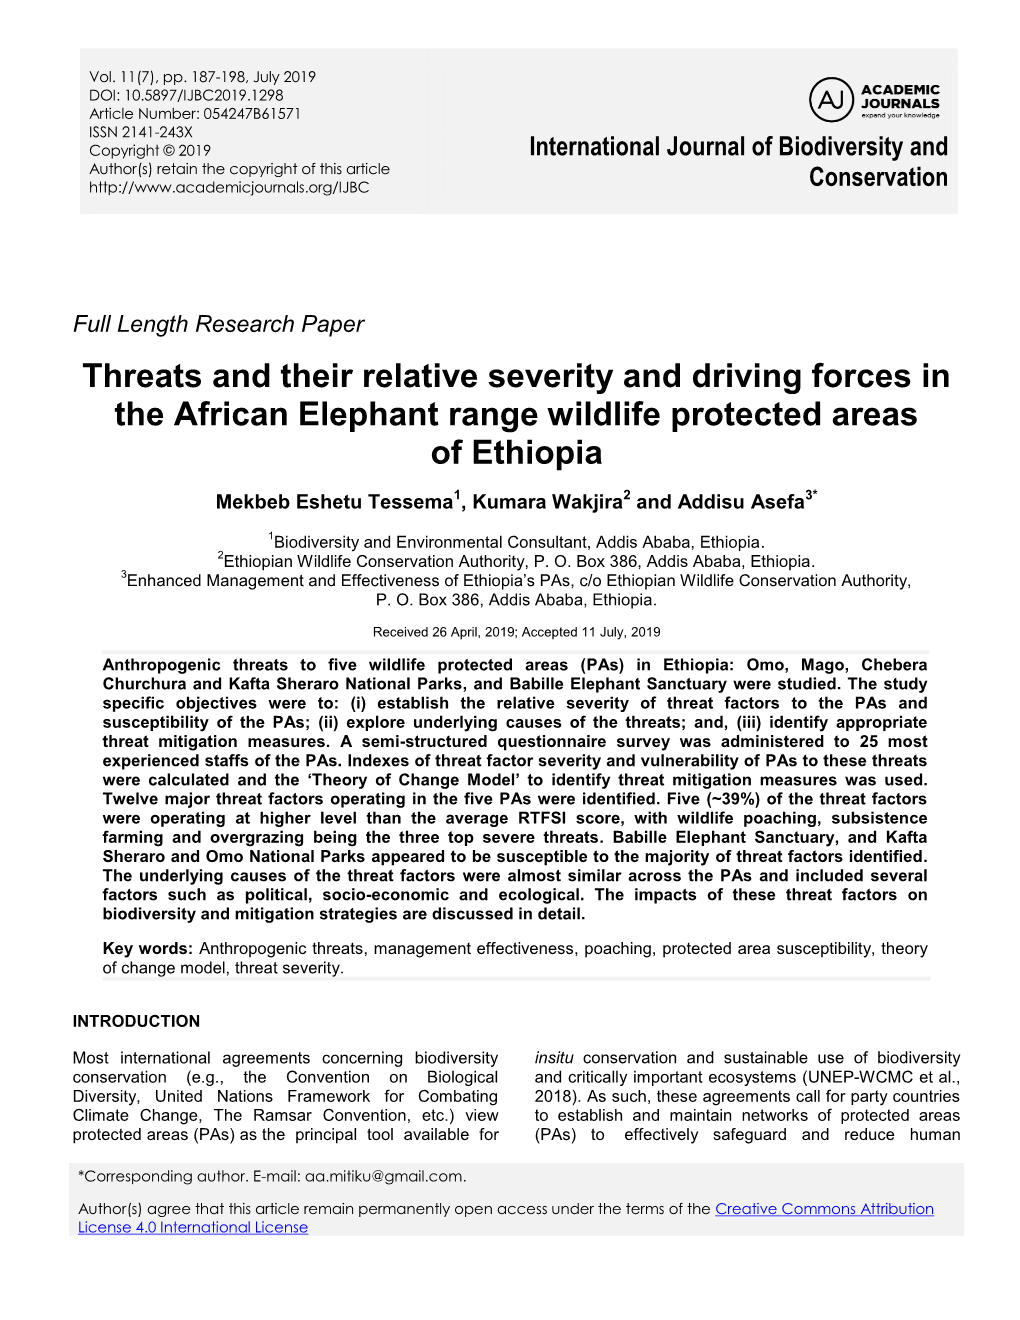 Threats and Their Relative Severity and Driving Forces in the African Elephant Range Wildlife Protected Areas of Ethiopia